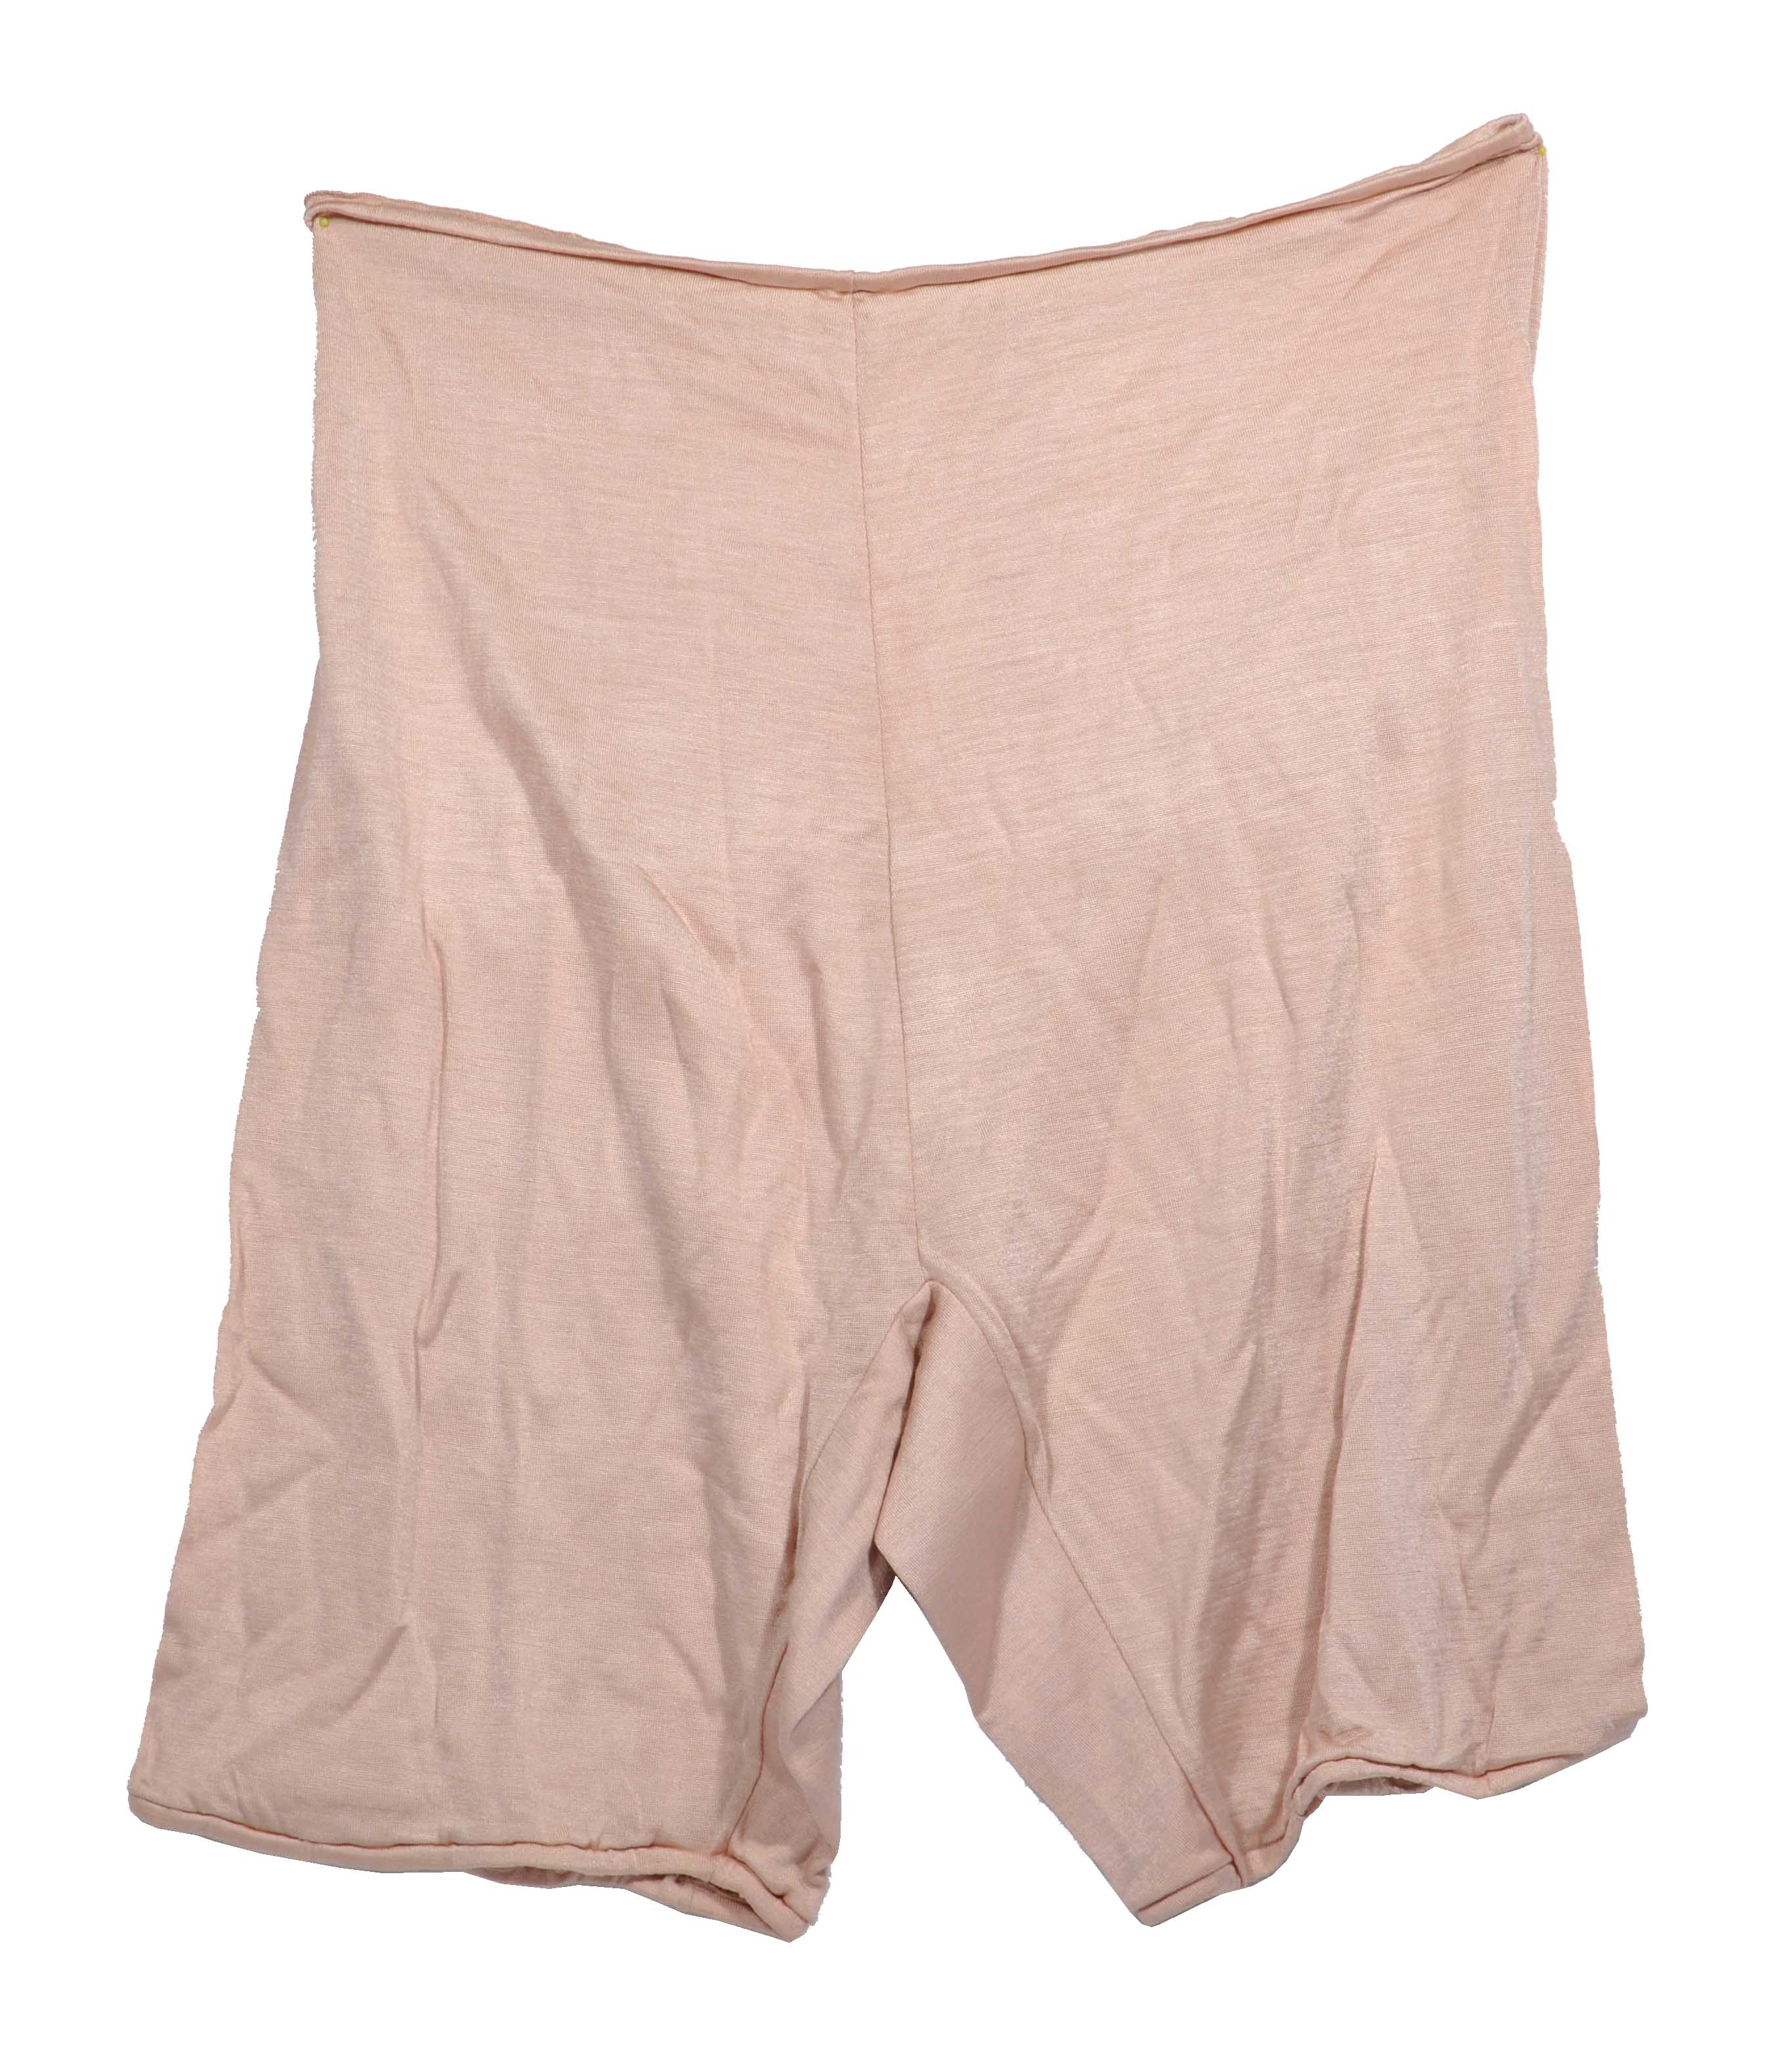 Directoire knickers - Oxford Reference